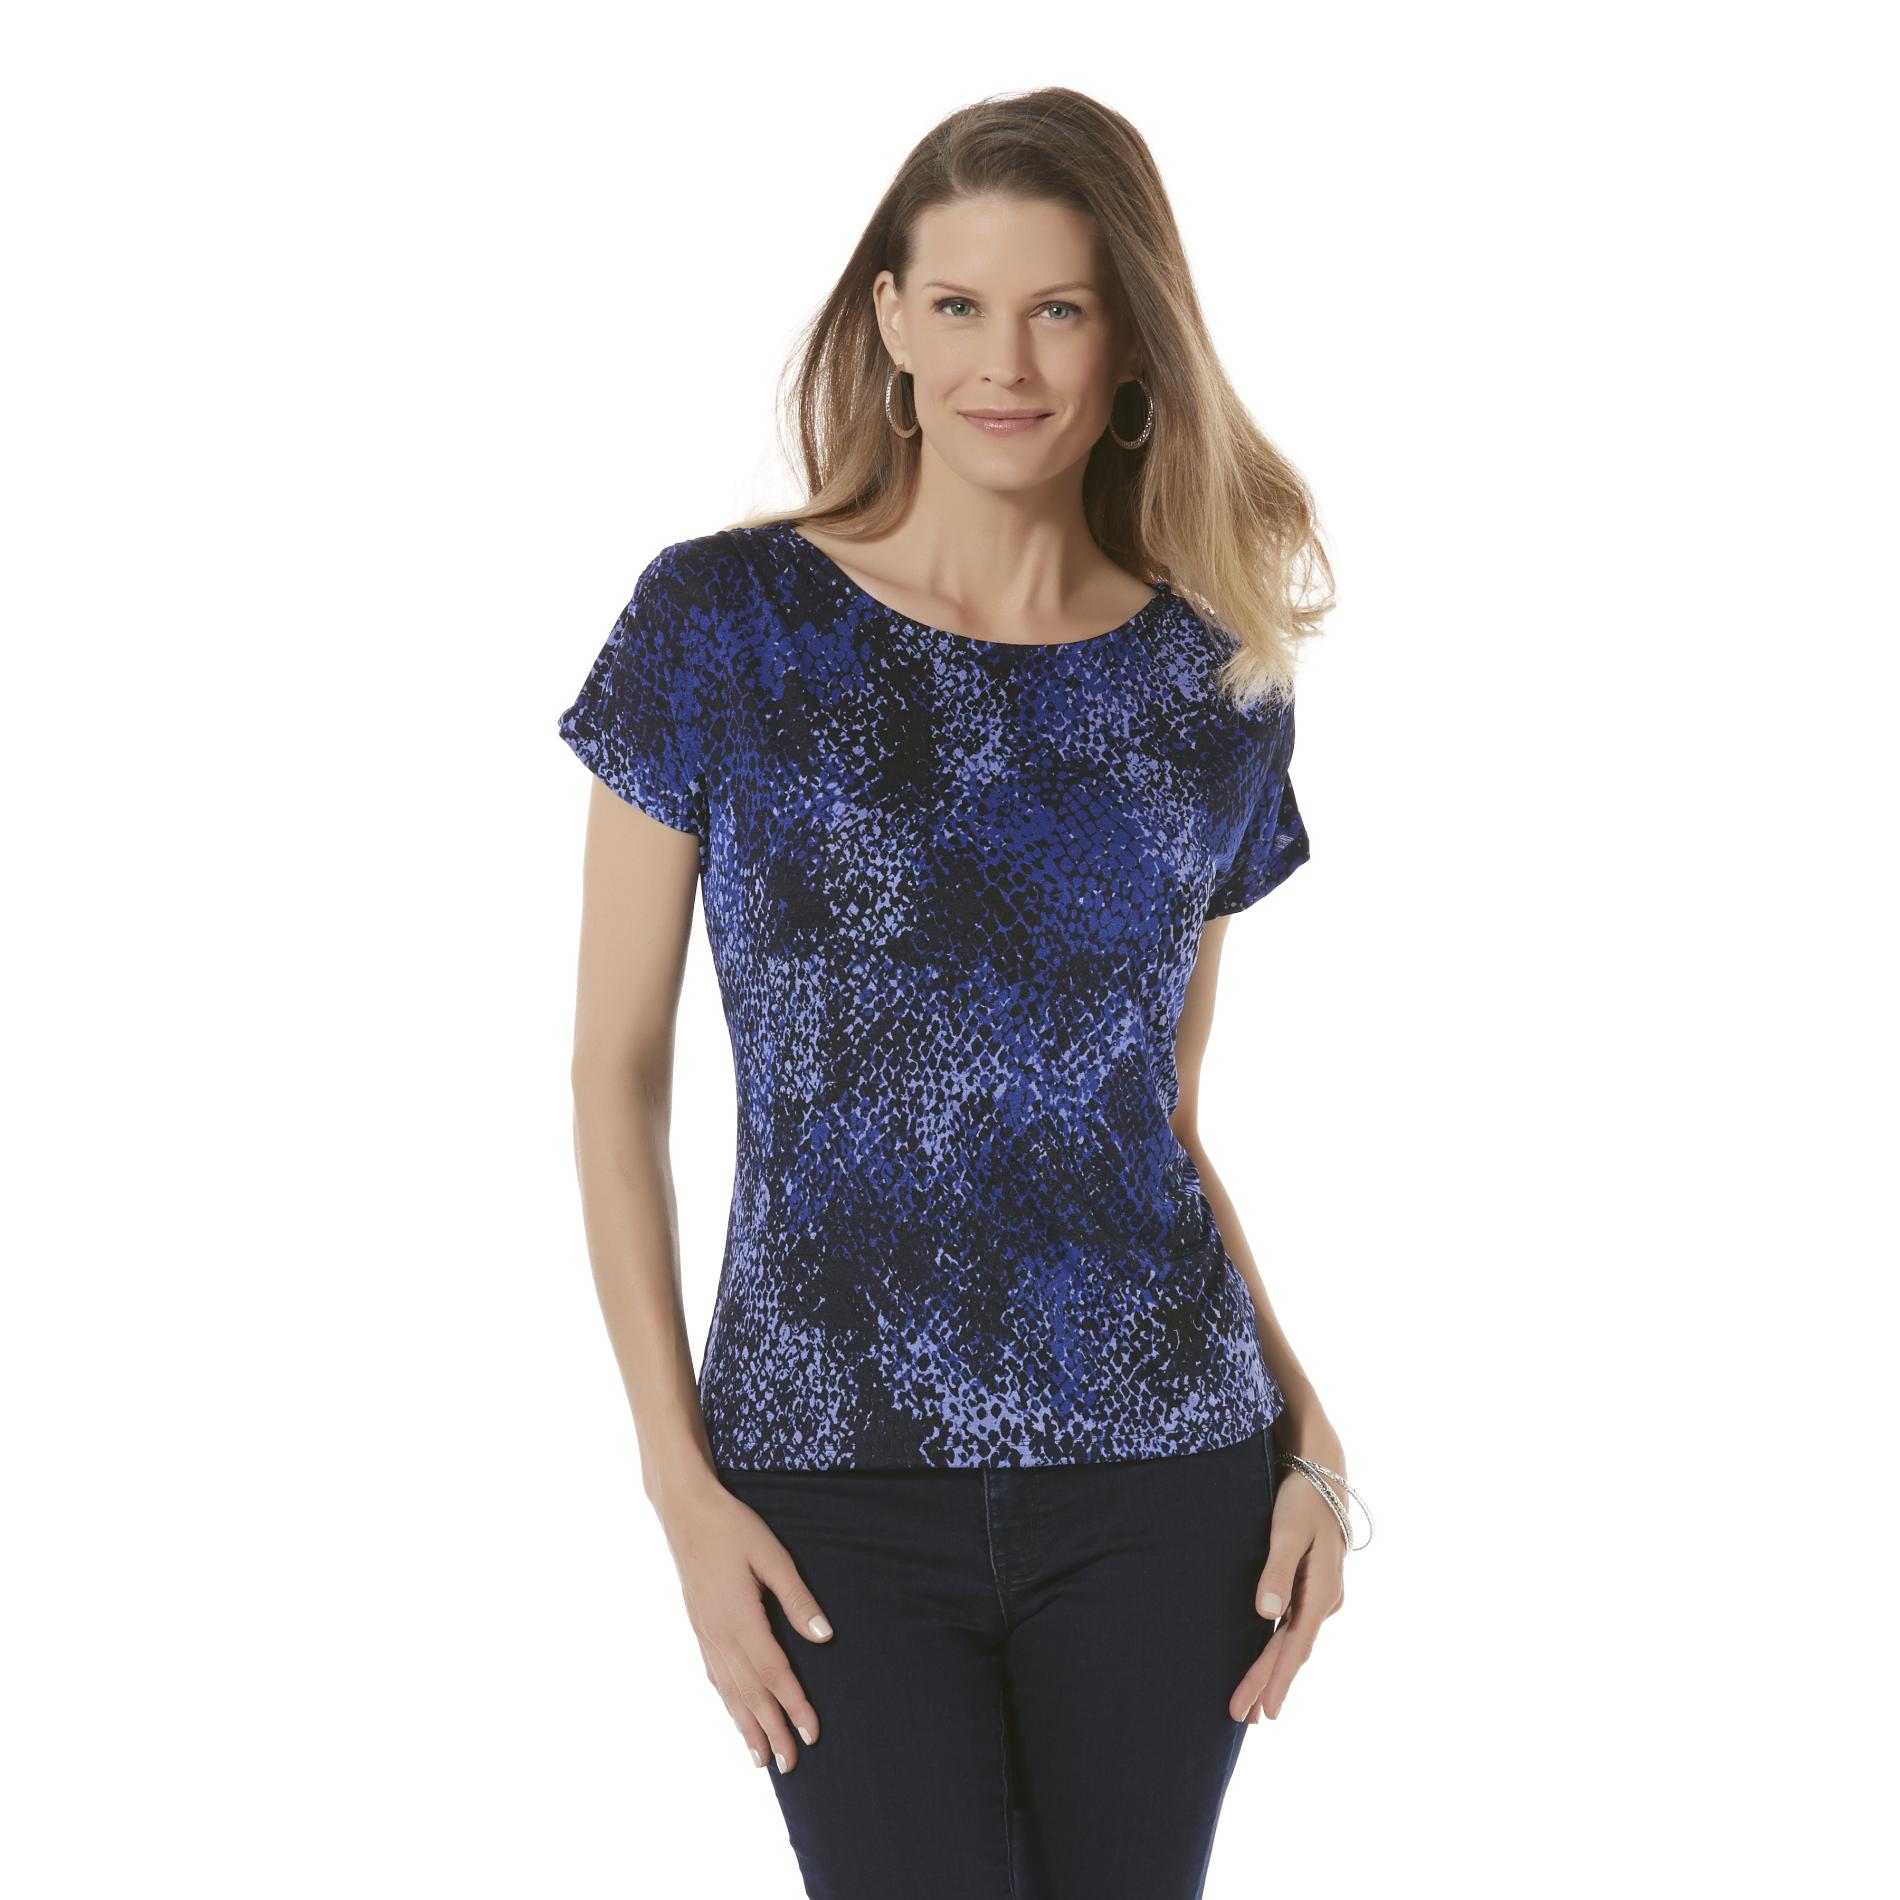 Jaclyn Smith Women's Silky Knit Top - Abstract Snakeskin